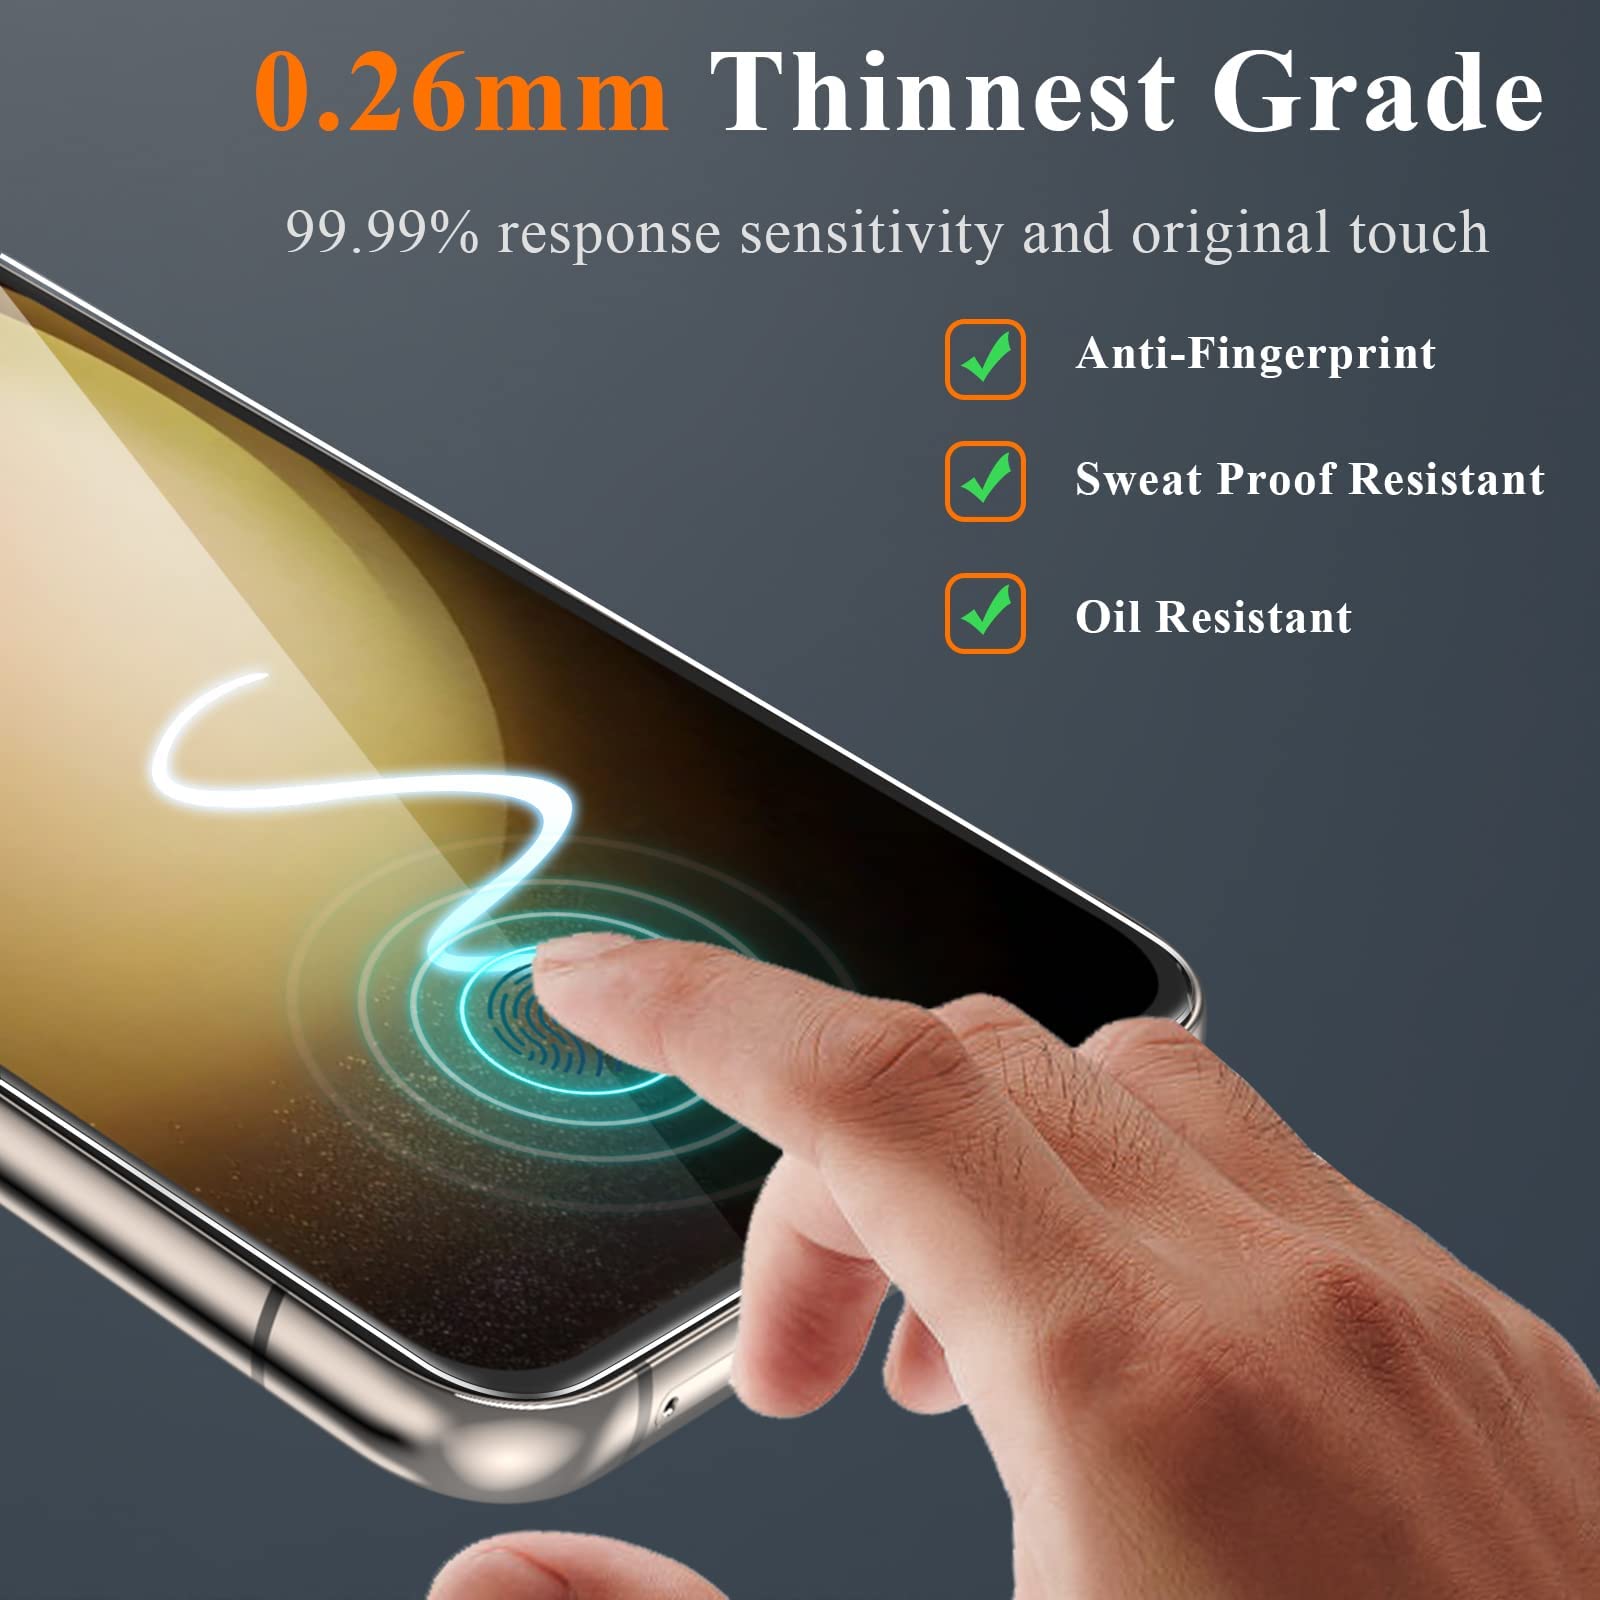 YMHML 3 Pack for Samsung Galaxy S23 Screen Protector Tempered Glass Upgrade Fingerprint Unlock Compatible with 3 Pack Camera Lens Protector, HD Clear Case Friendly Full Screen Protector for Galaxy S23